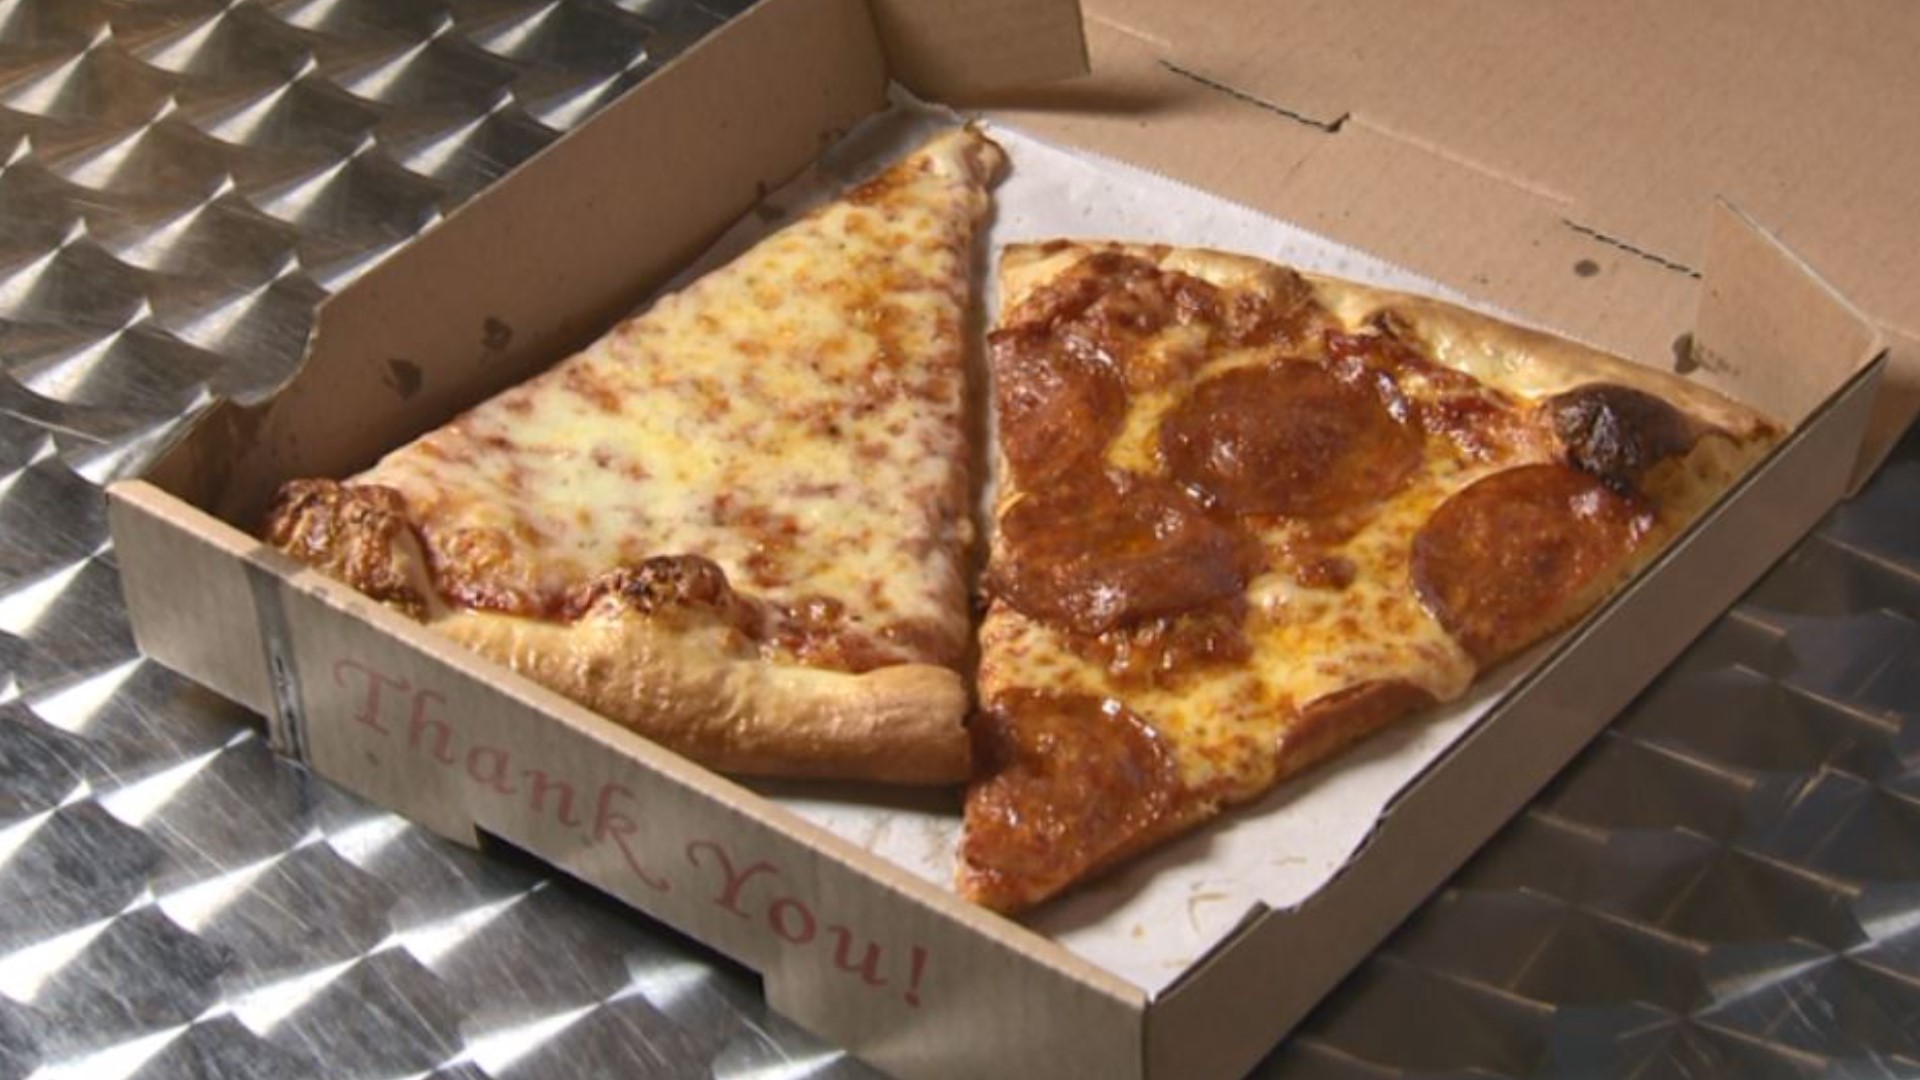 Pair takeout from Salamone’s Pizza in Tacoma with new movie ‘Save Yourselves!’